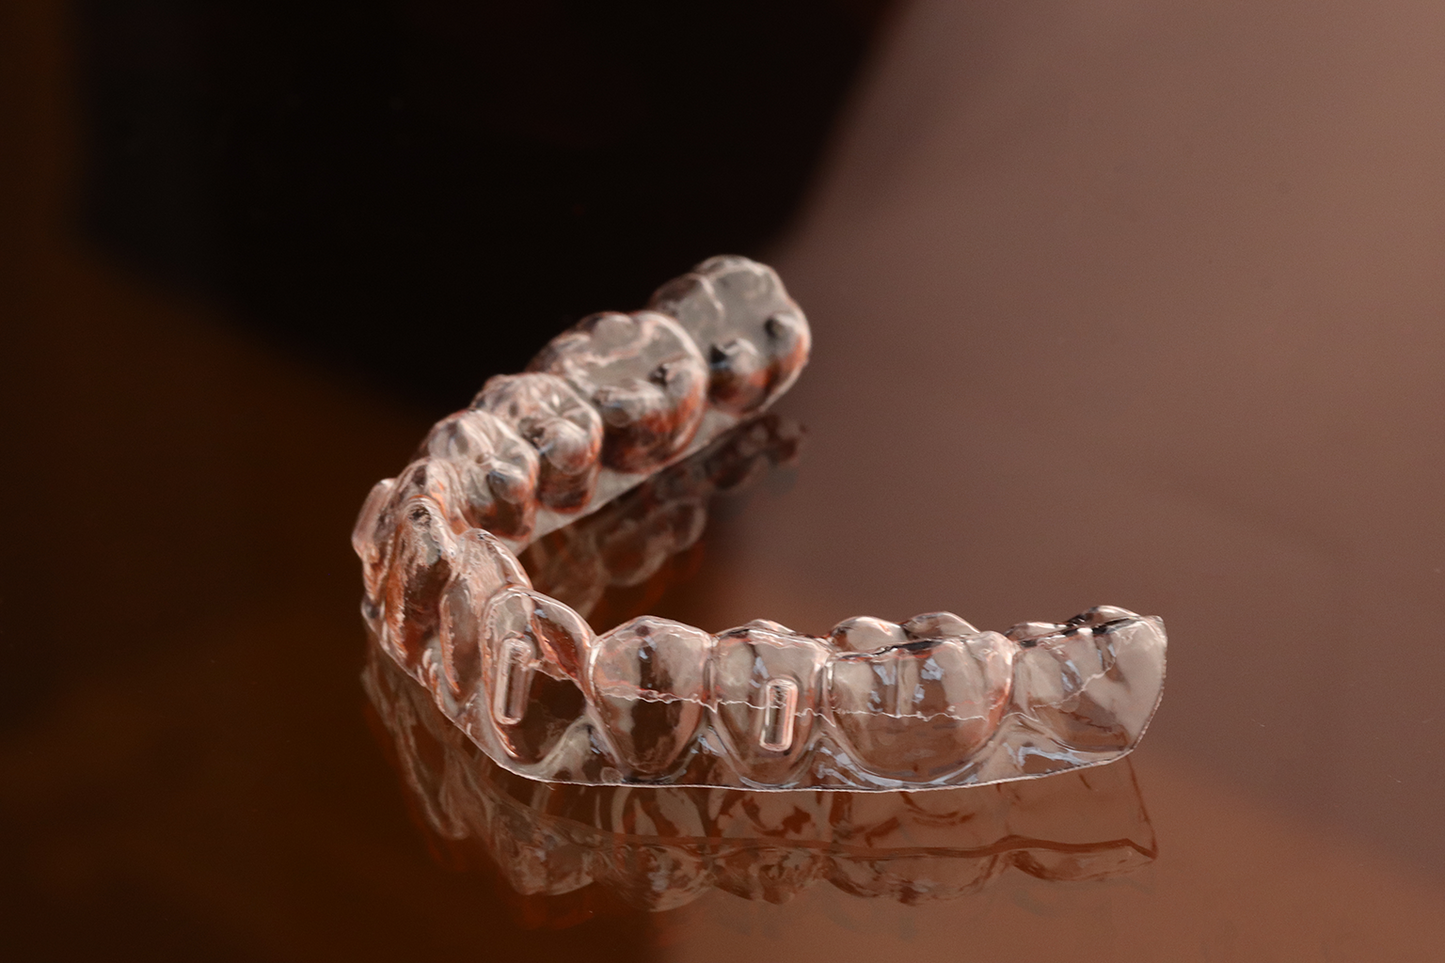 Production of the aligners